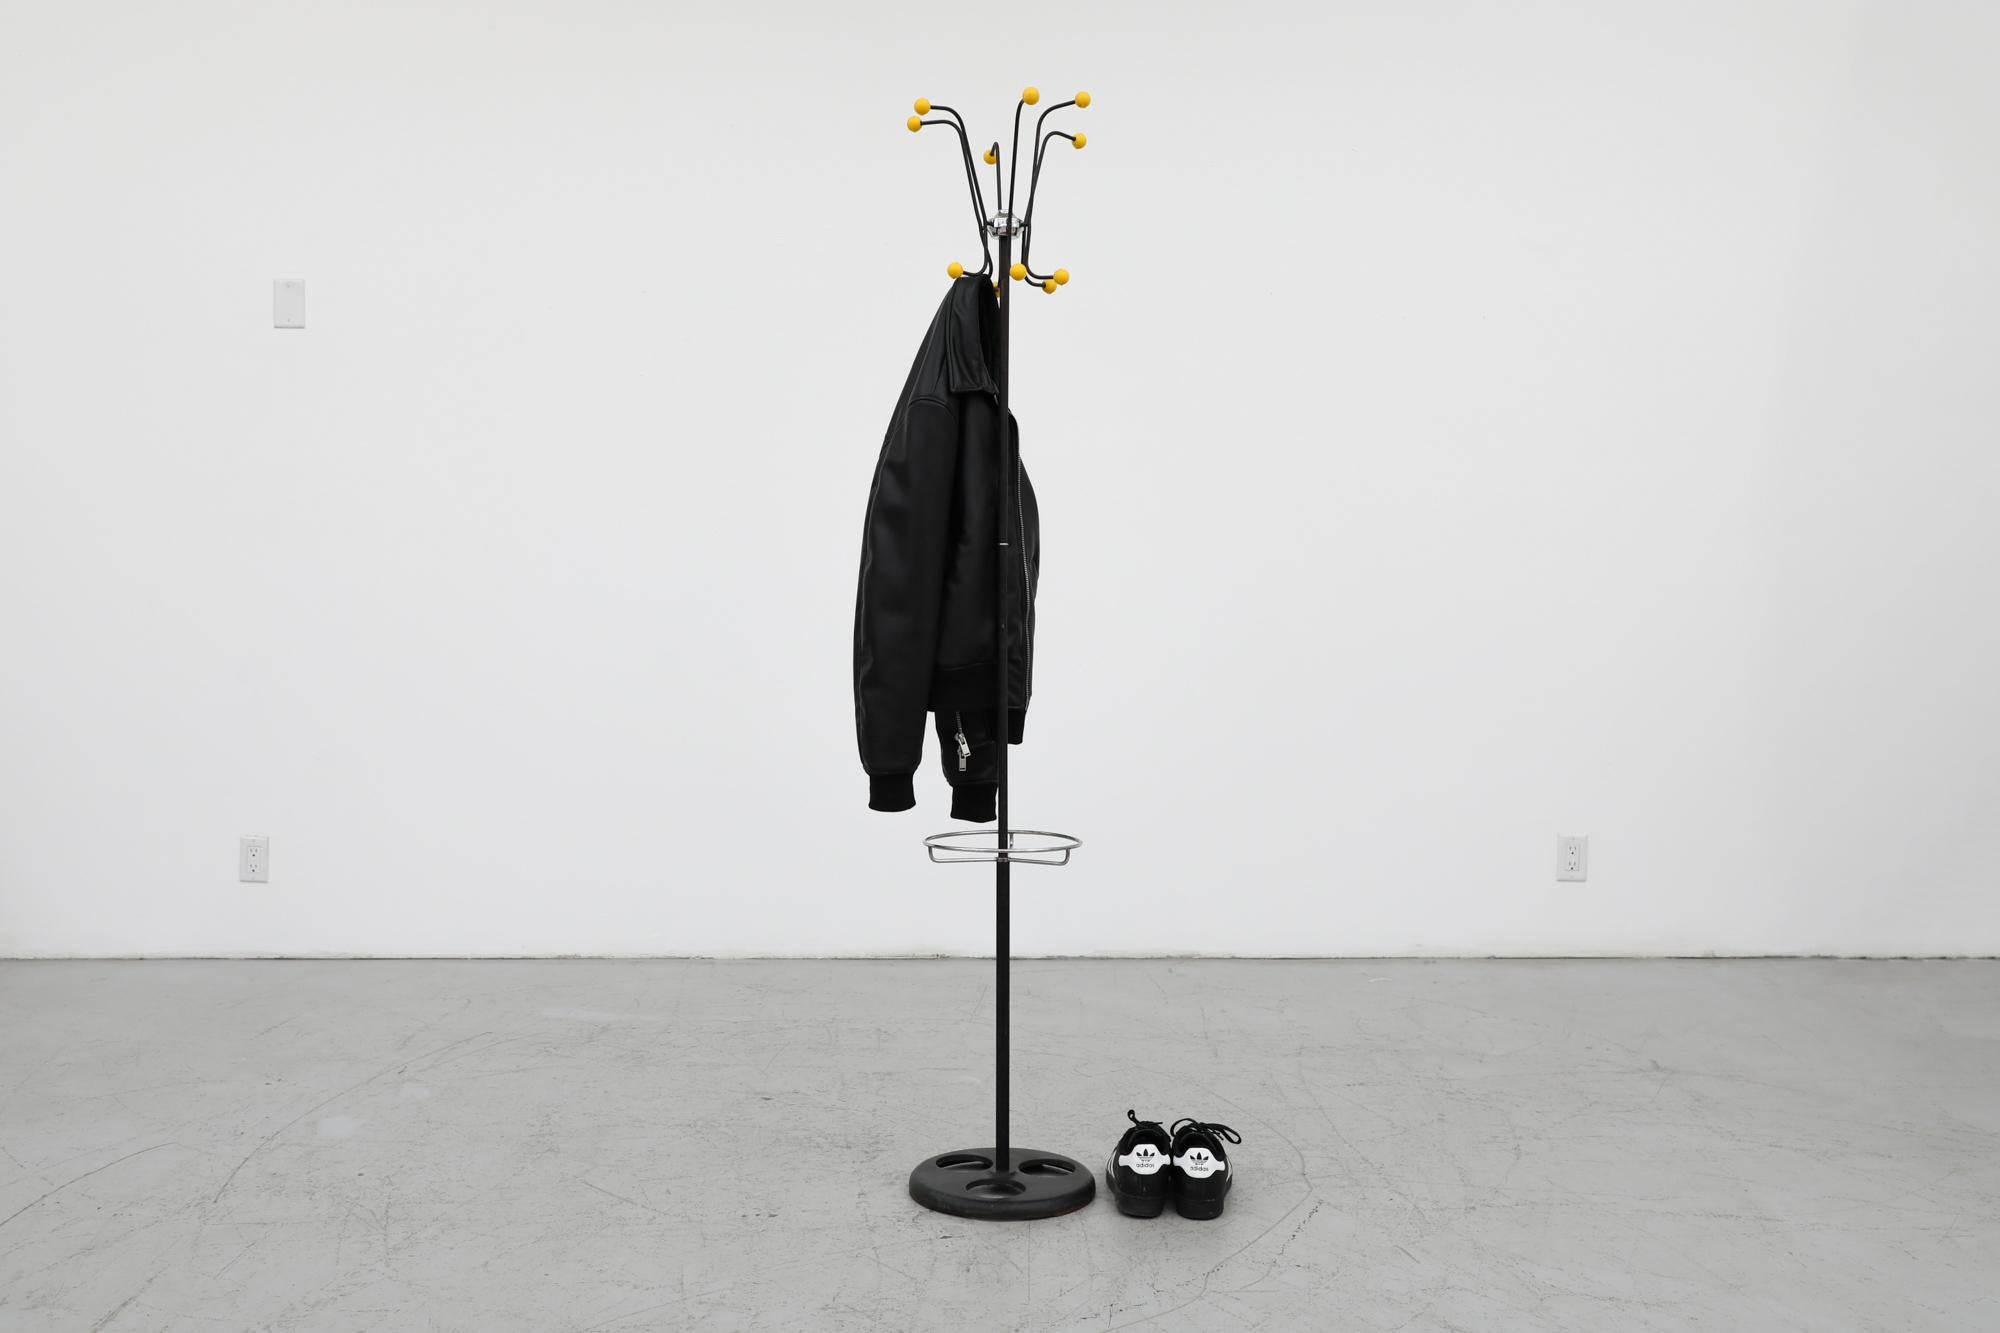 Hago Atomic black enameled metal coat stand with Yellow plastic bobbles and metal ring for umbrellas. In Original Condition with no drip plates and some visible wear consistent with age and use. Other coat stands also available and listed separately.